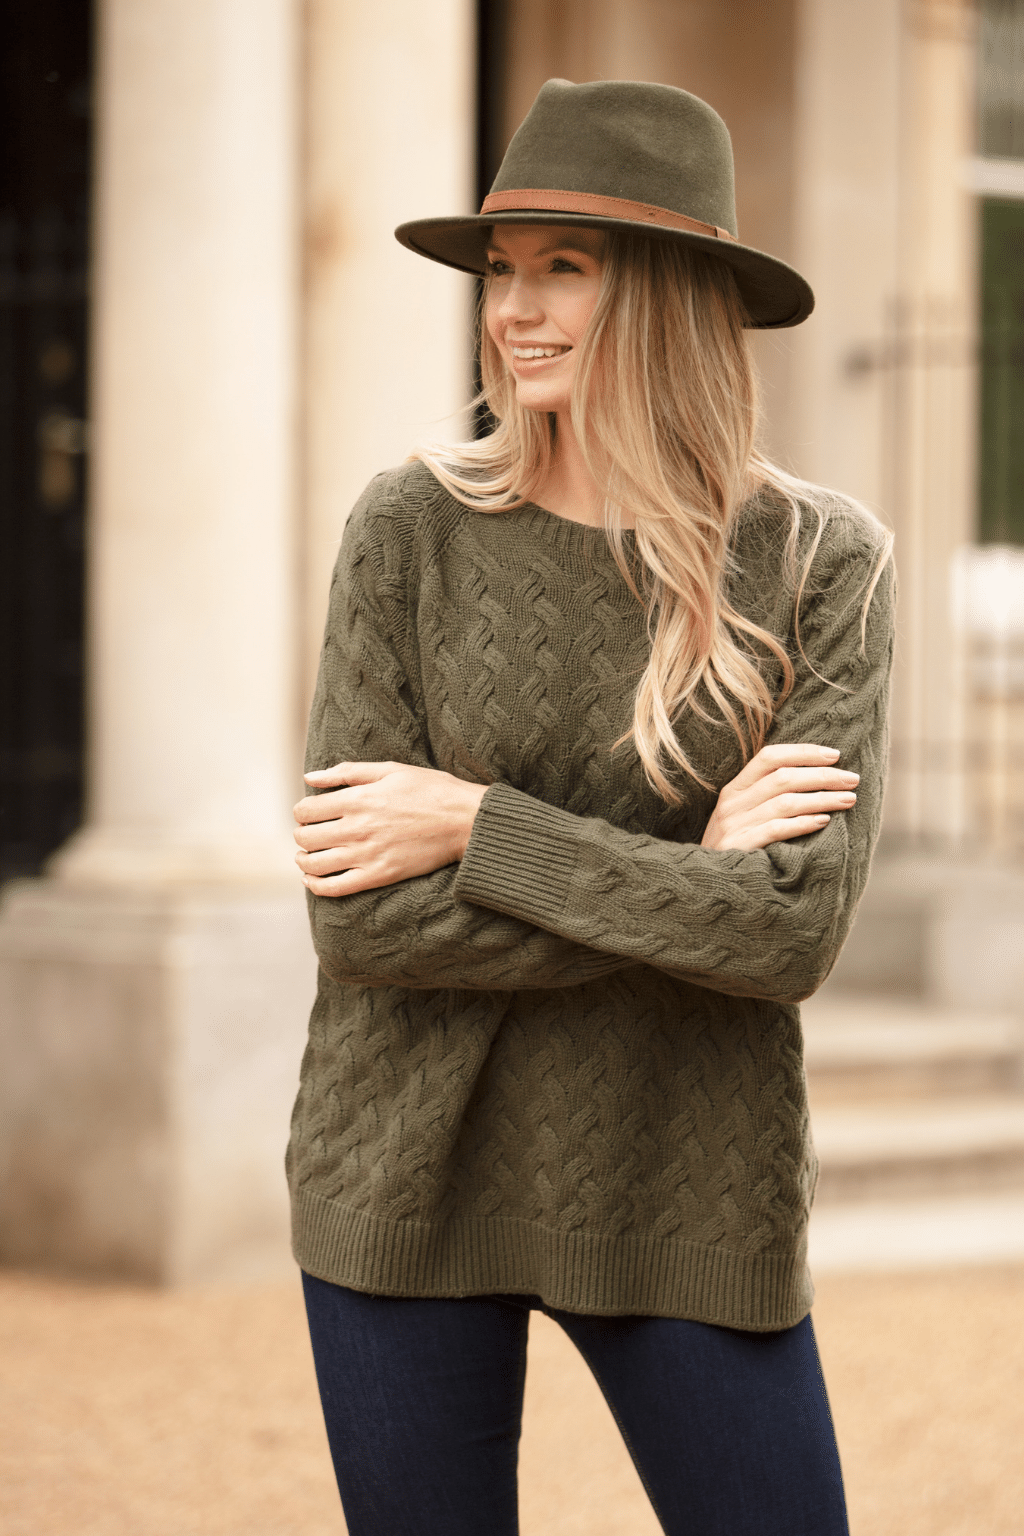 Cable knit Cashmere Sweater